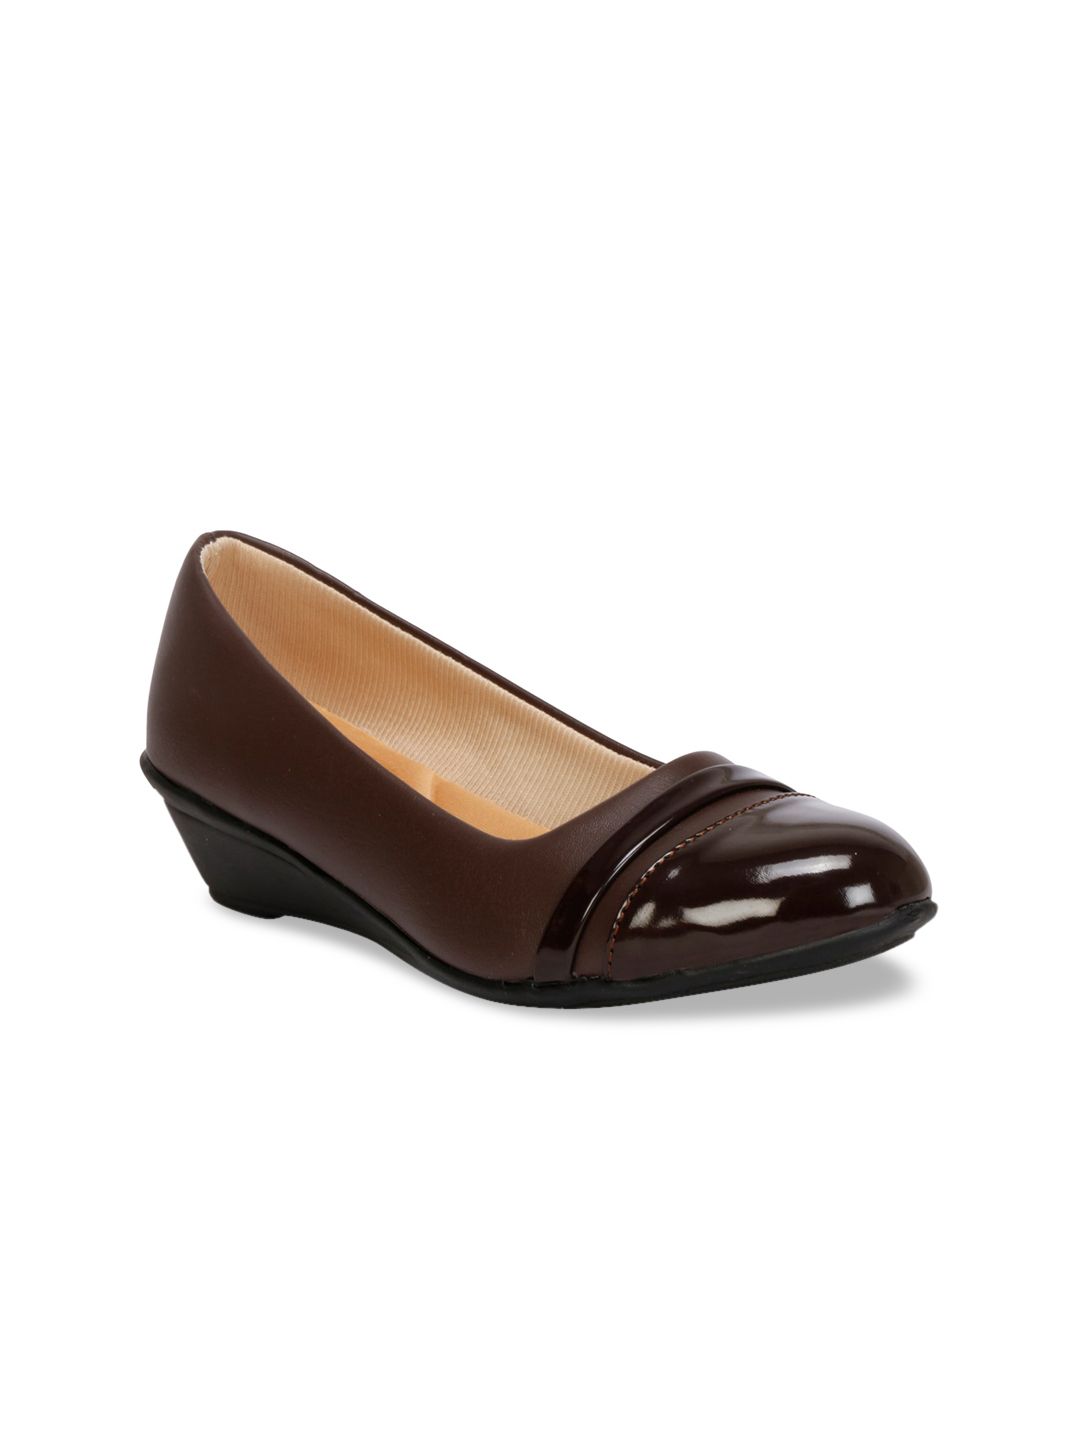 Denill Brown Wedge Pumps Price in India